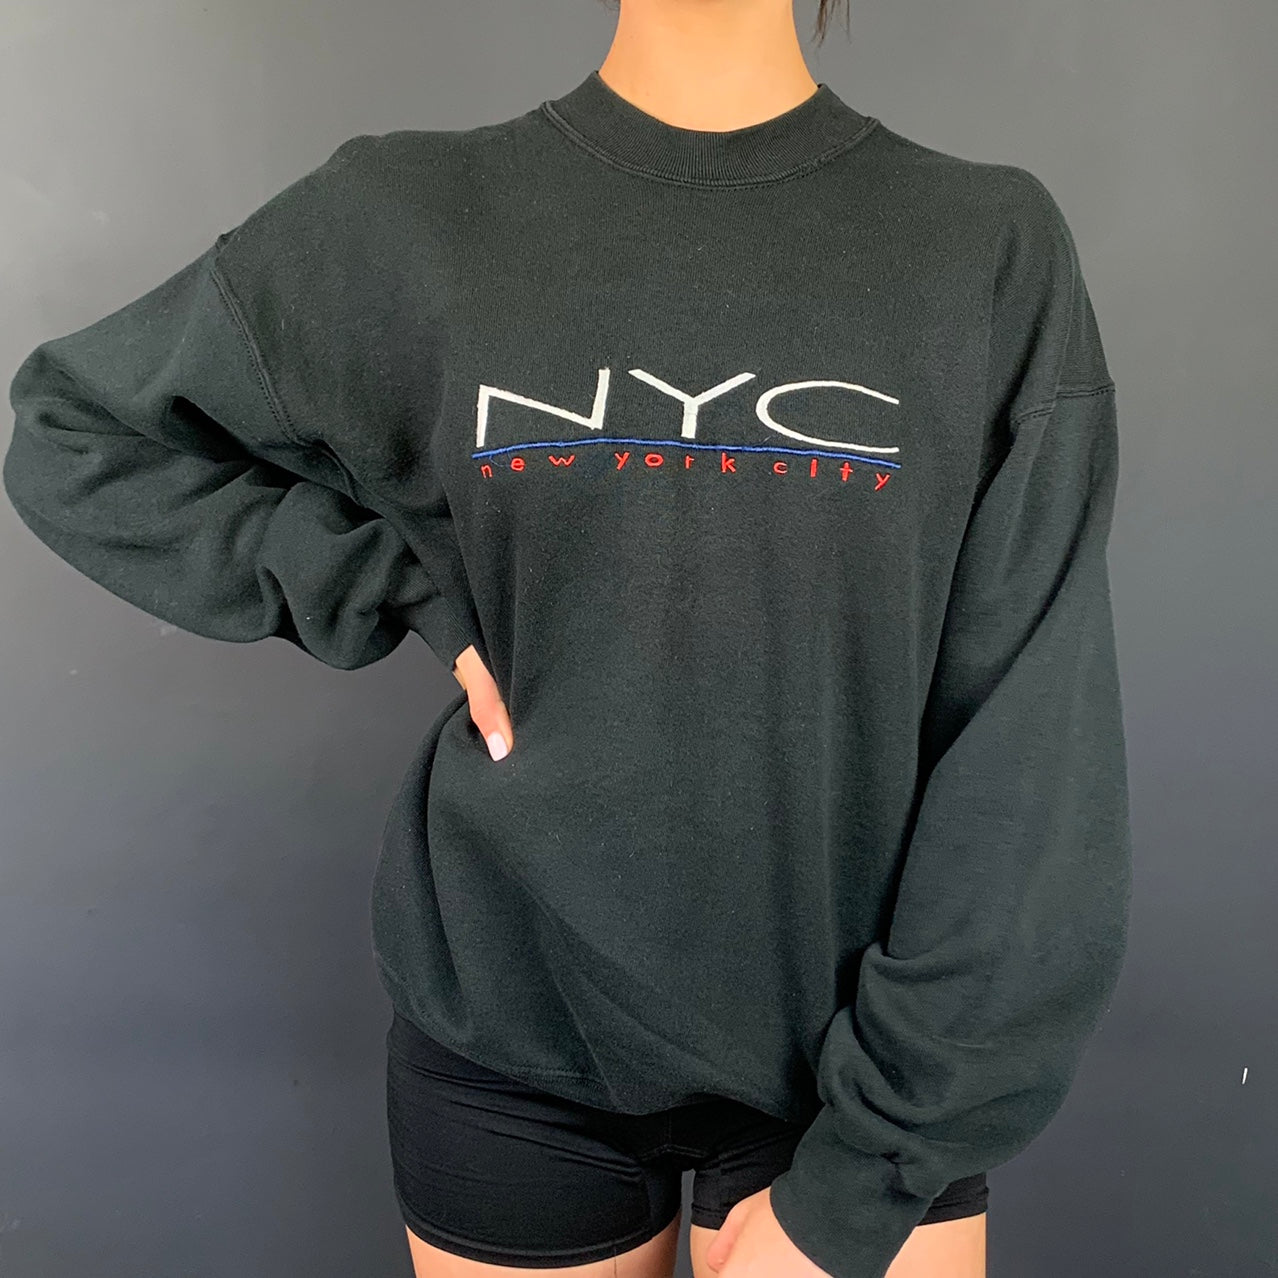 Vintage Sweatshirt with Embroidered New York City Spellout